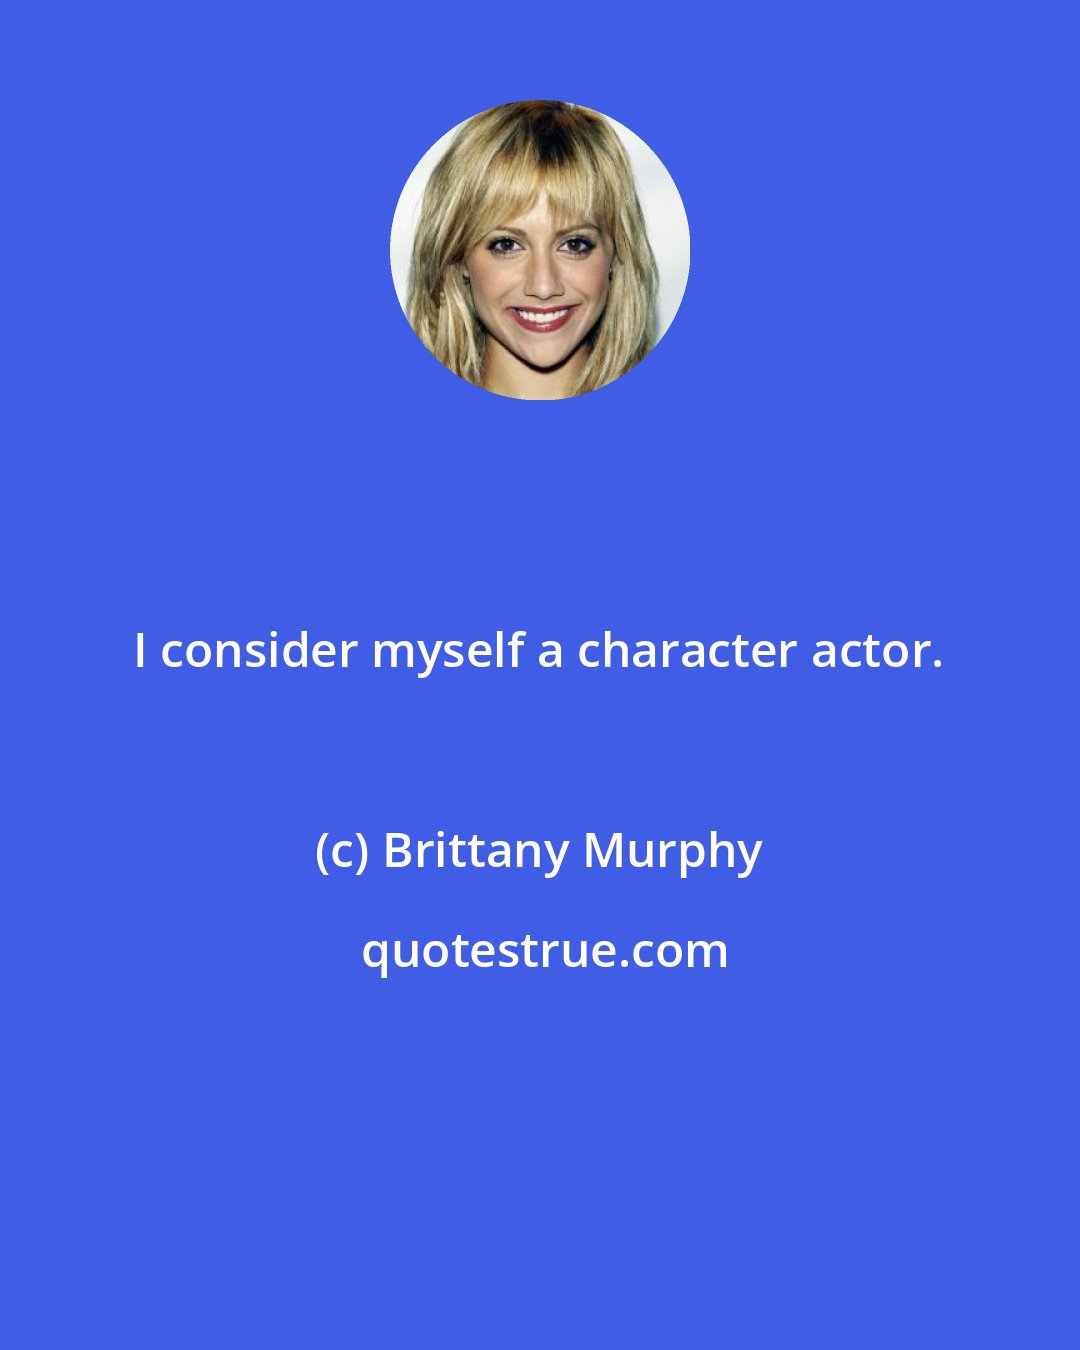 Brittany Murphy: I consider myself a character actor.